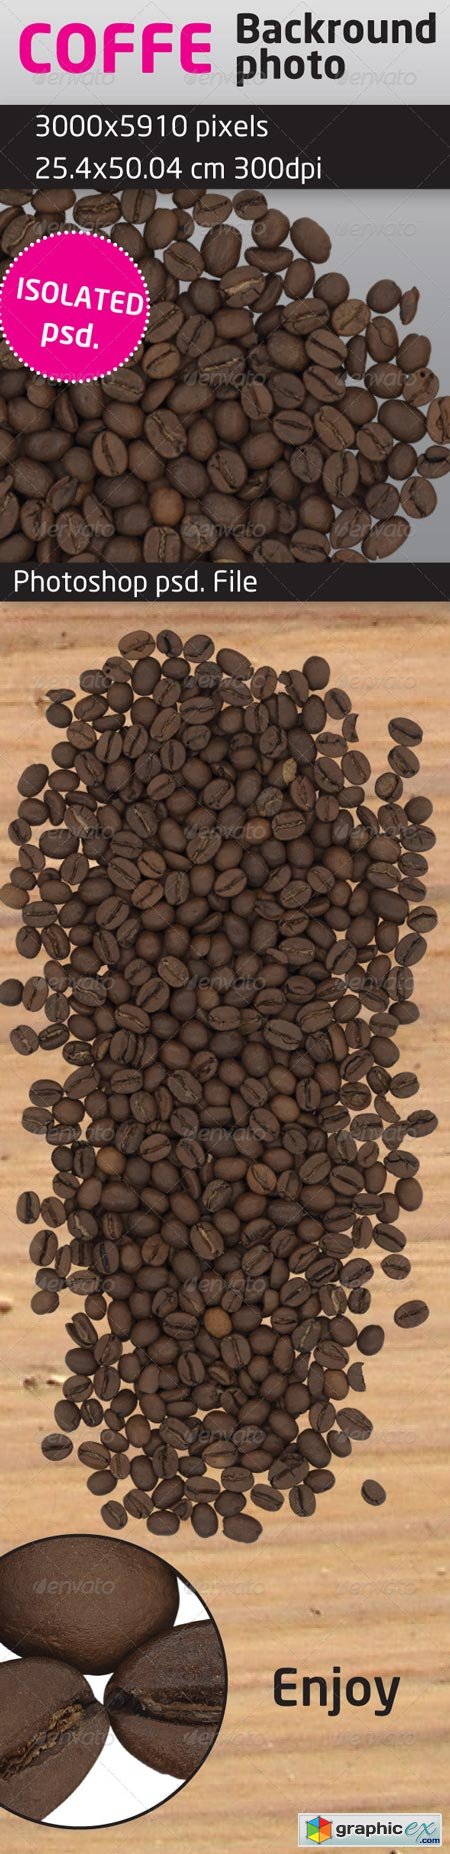 Coffee Beans Isolated Backround 1127683